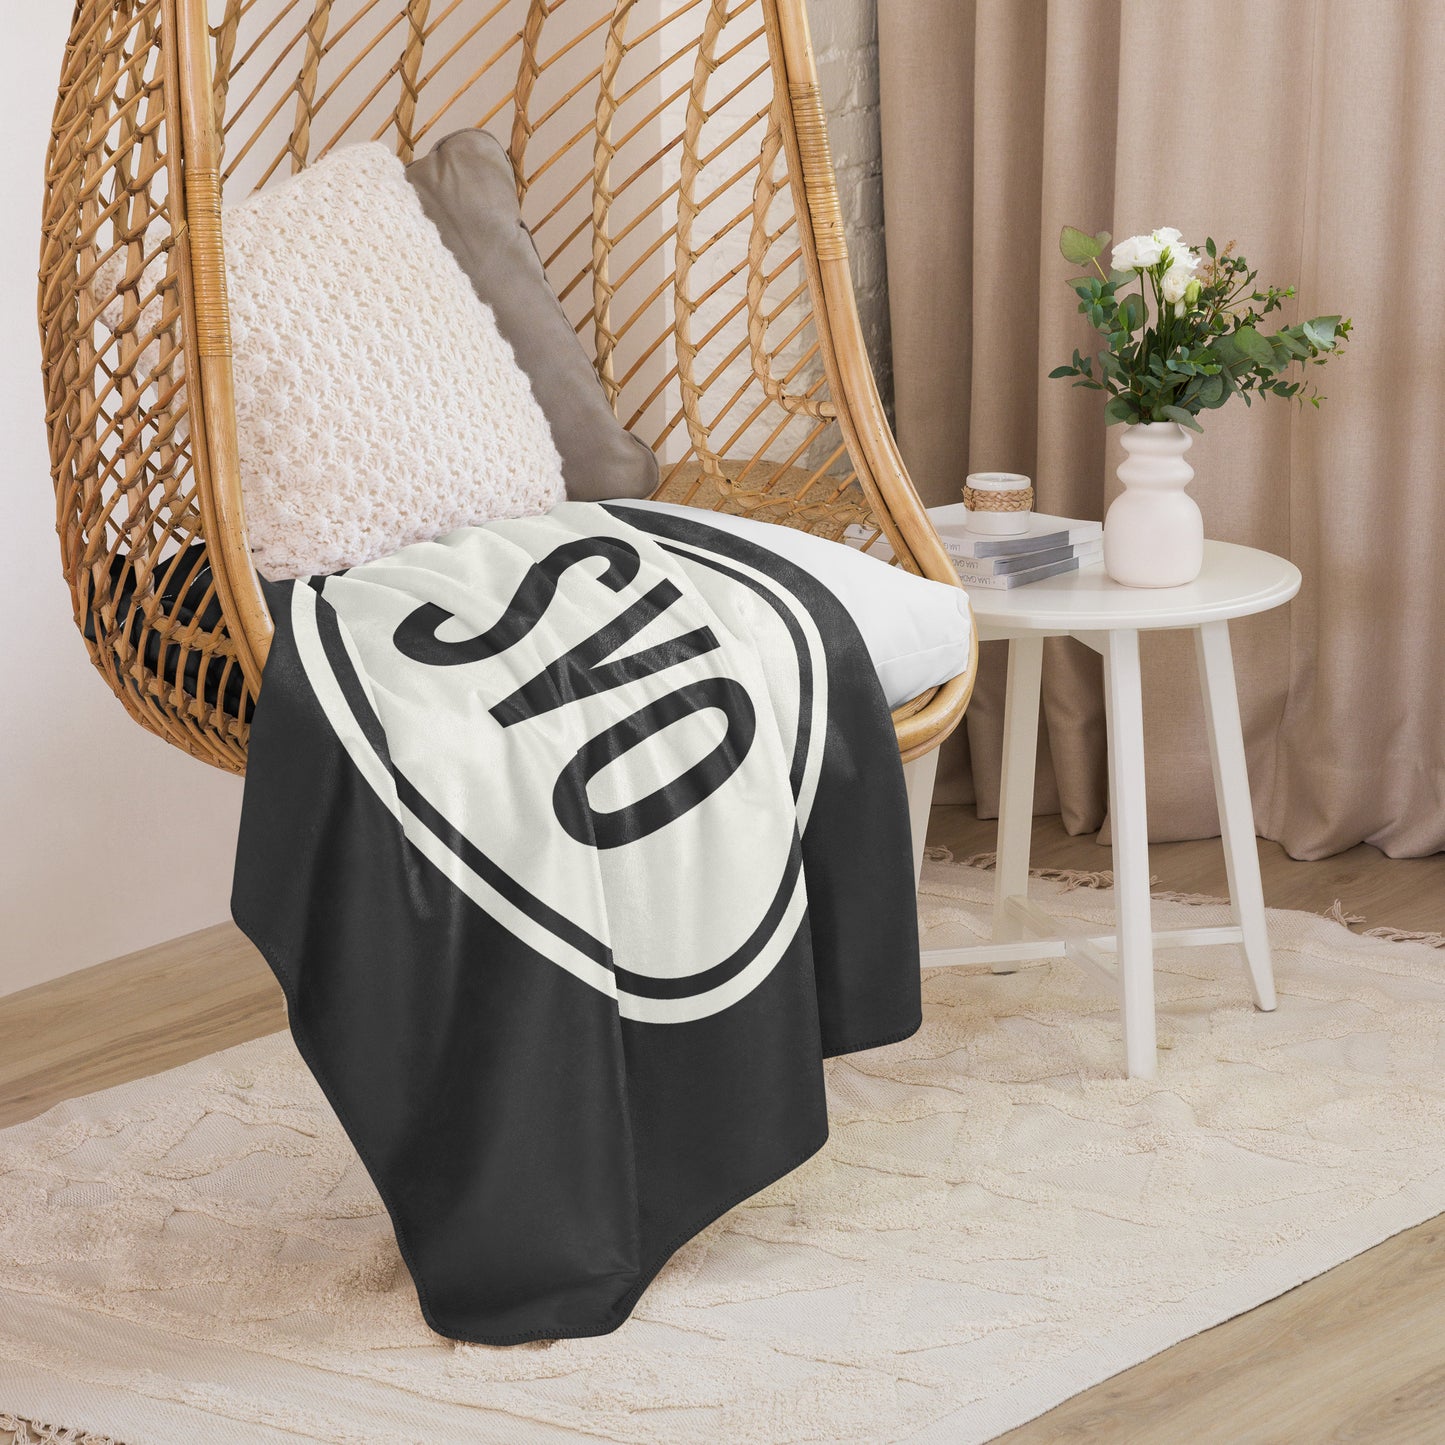 Unique Travel Gift Sherpa Blanket - White Oval • SVO Moscow • YHM Designs - Image 06